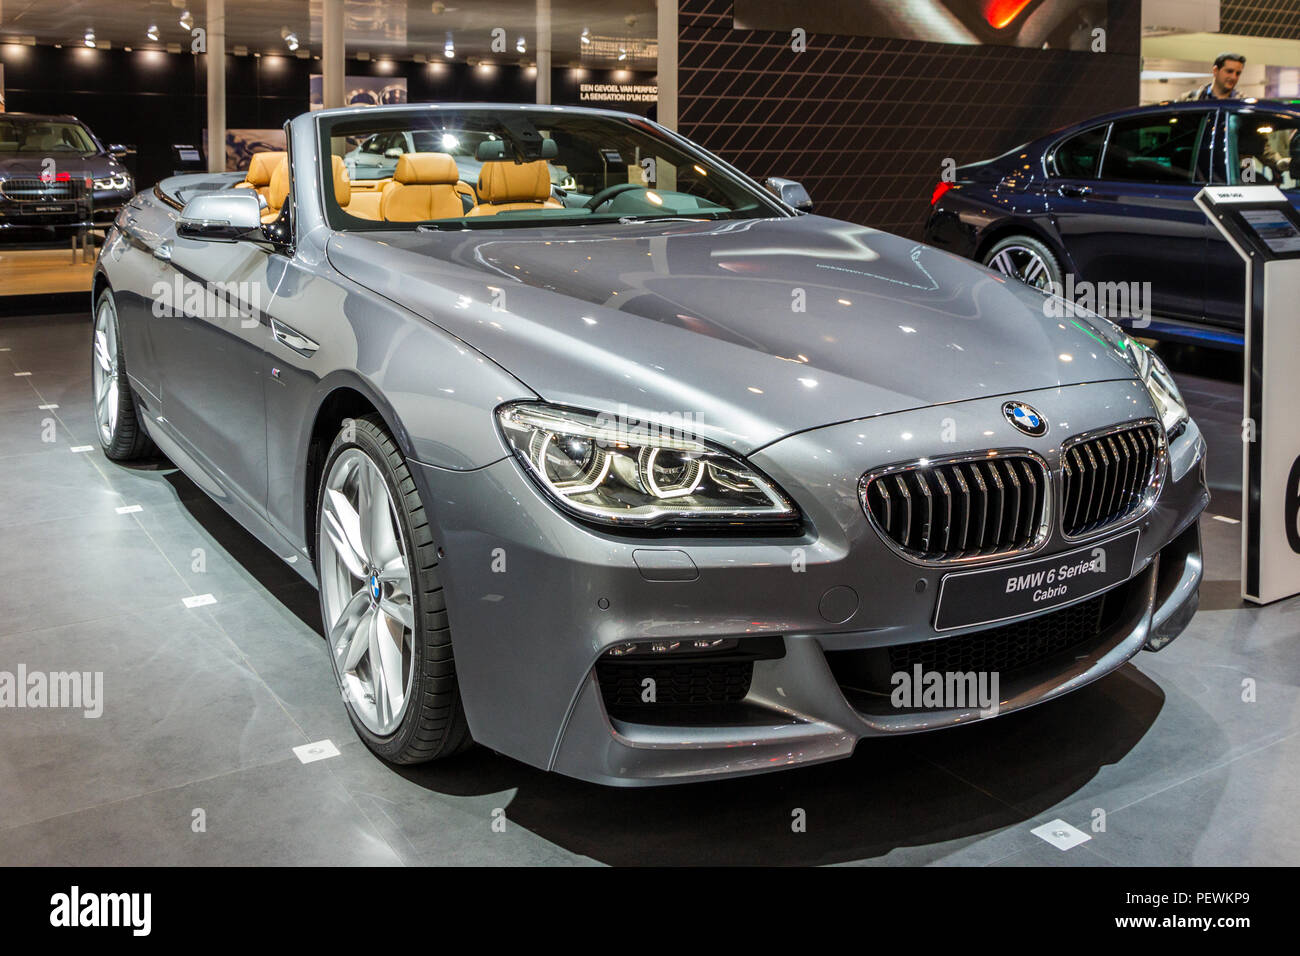 BRUSSELS - JAN 12, 2016: BMW 6 Series Cabrio car showcased at the Brussels Motor Show. Stock Photo